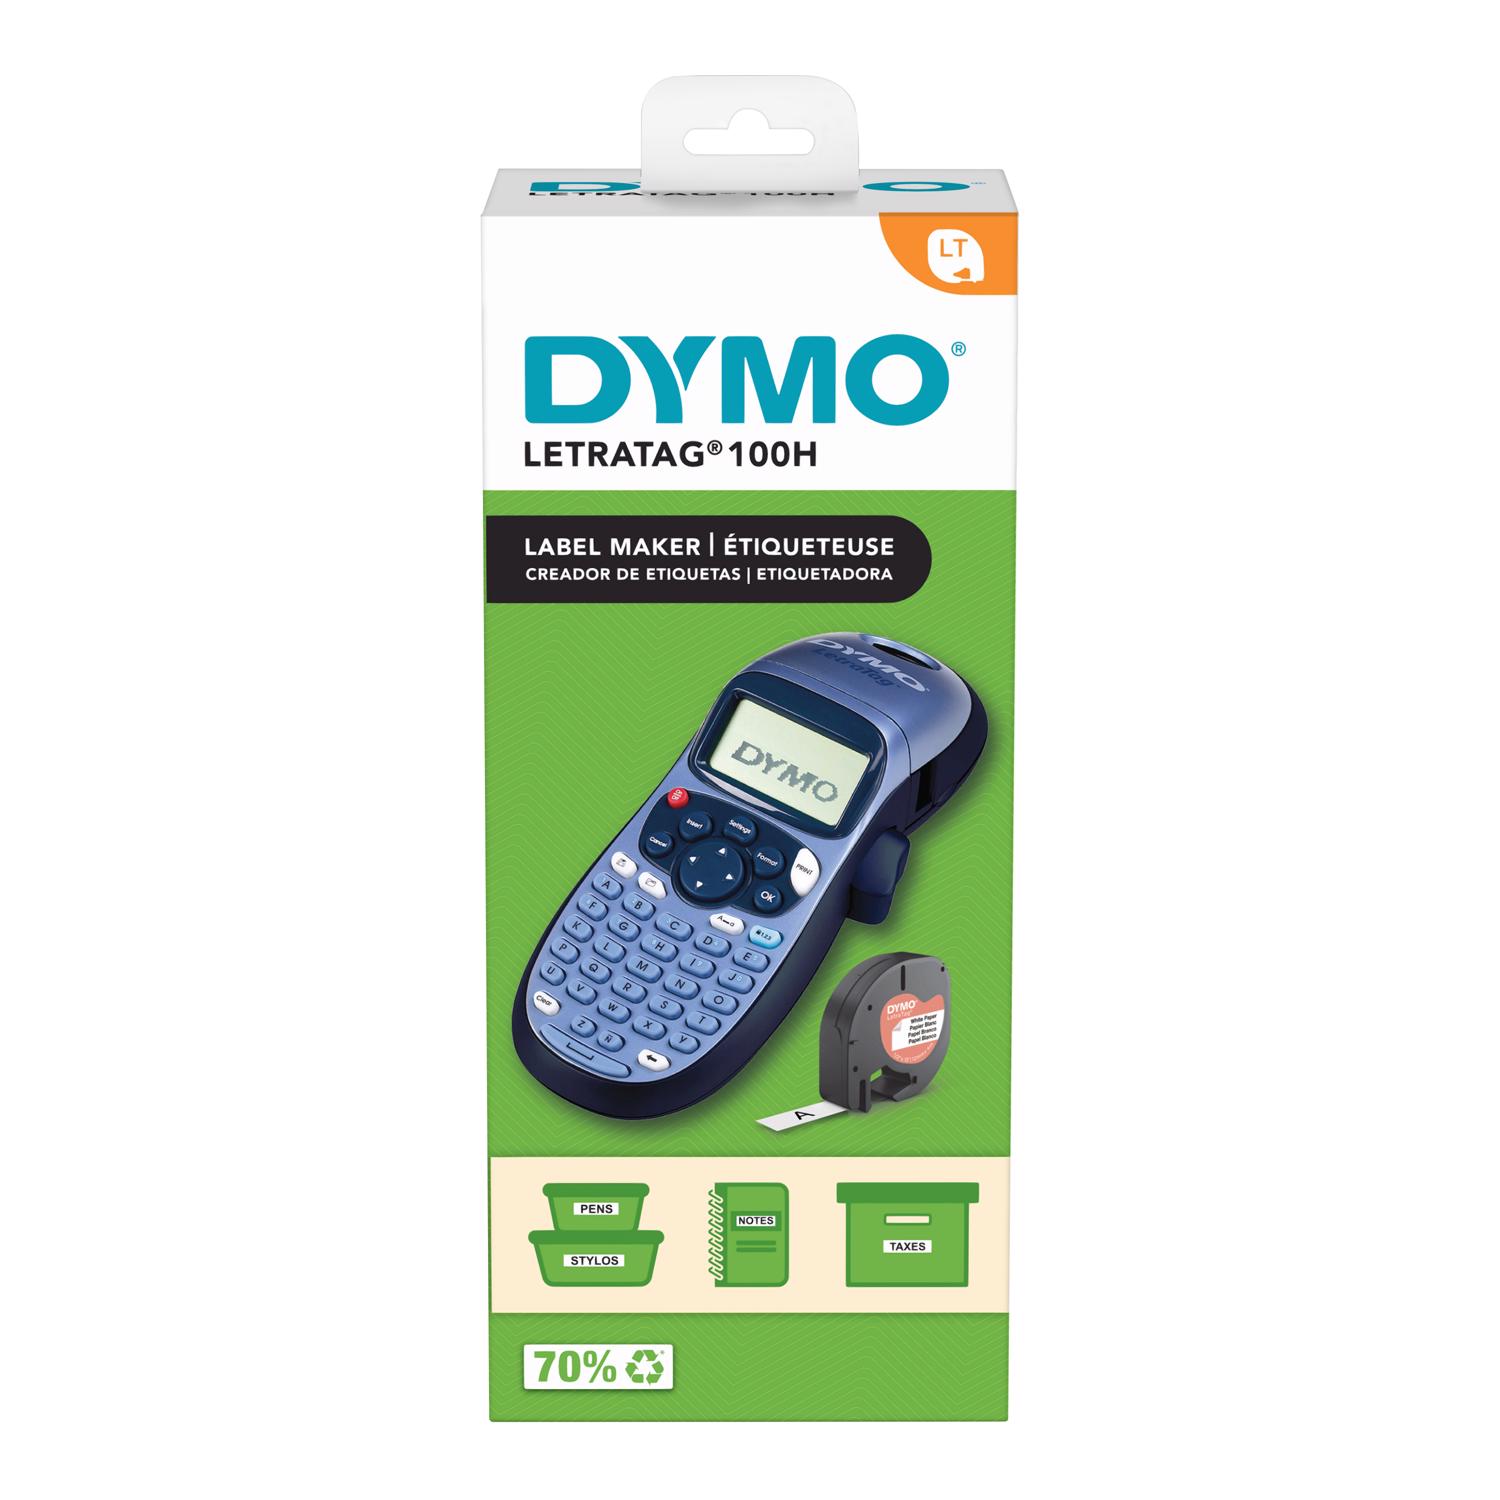 Photos - Accessory DYMO LetraTag Battery-Powered Personal Label Maker 2174534 